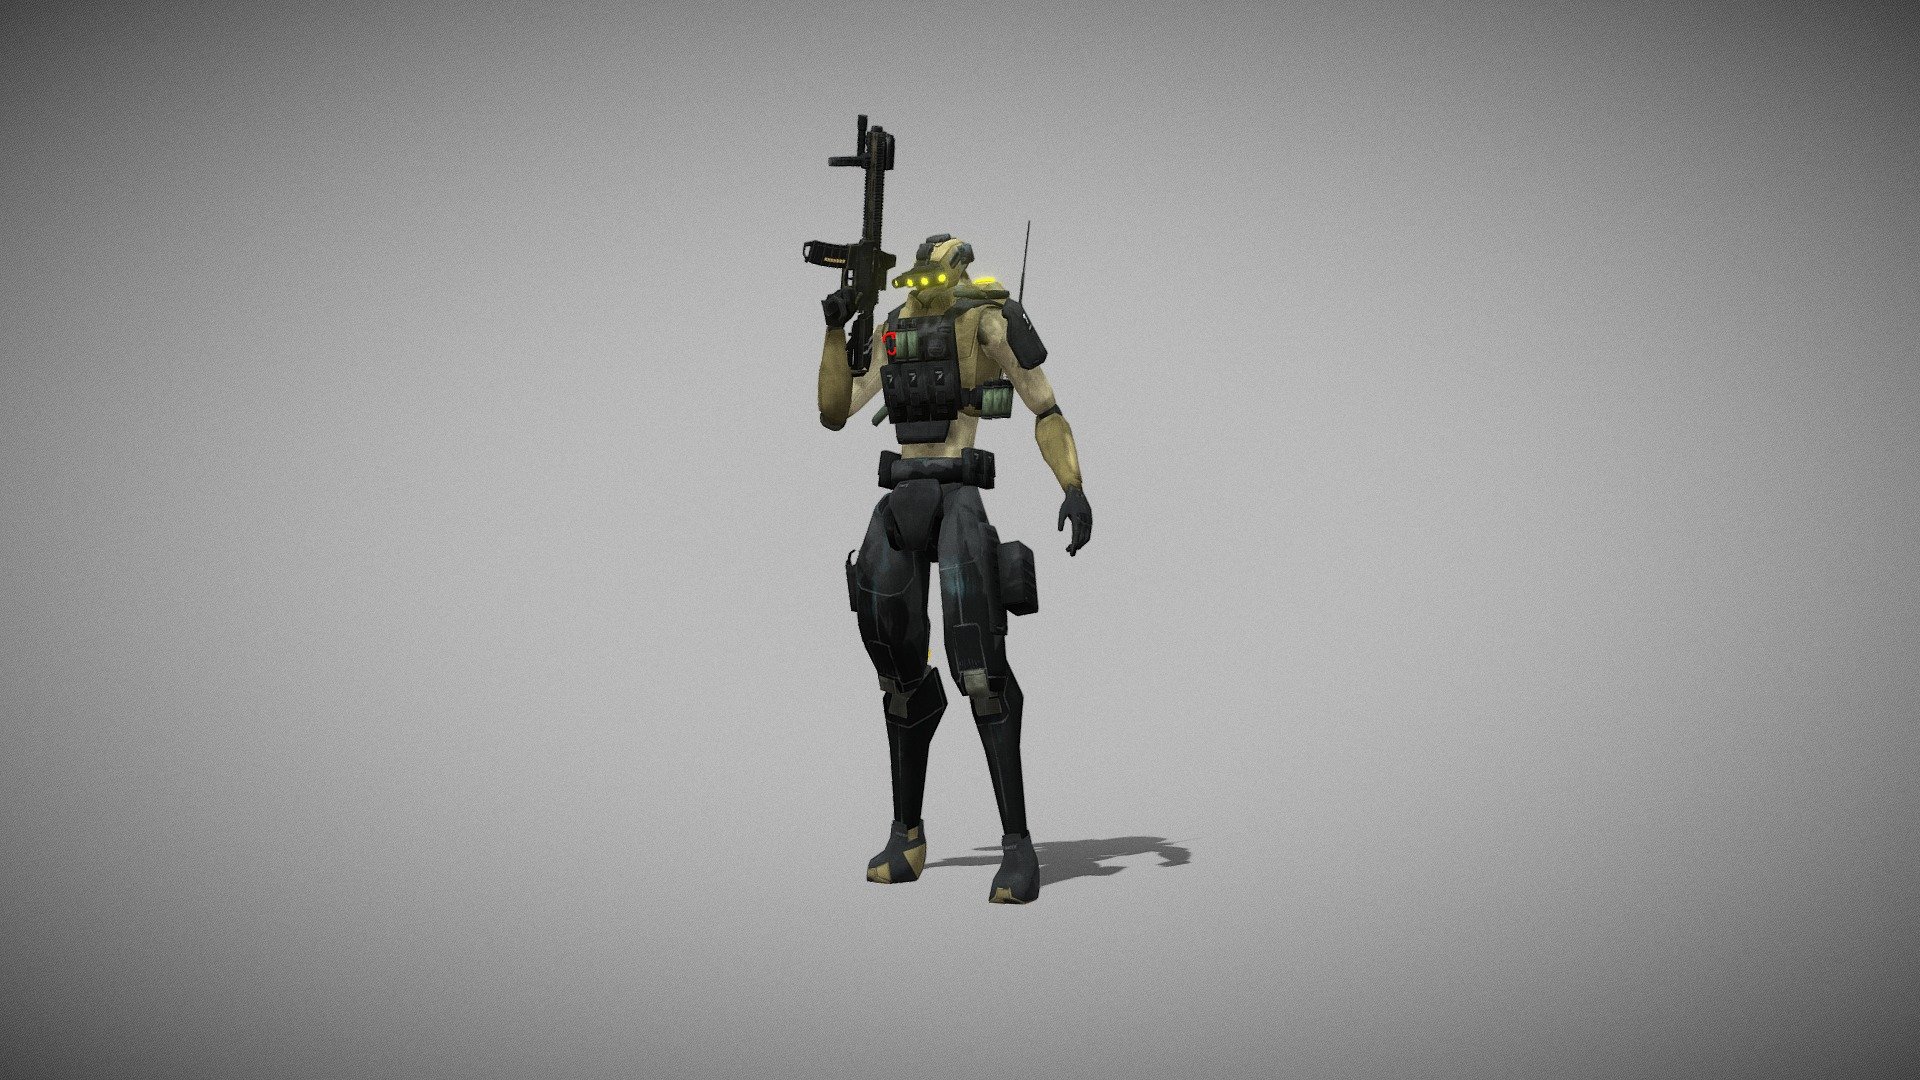 This is a model I have been working on for a couple months now called Dagger MK II. It is a modern military mech made to replace a human soldier. This version carries an M4-A1 as well as a full tactical kit. It is rigged and textured and ready to animate! I also added a fully adjustable gun so that you can make it unique to you!  The model will be released on my Patreon on Oct 16!

*I had some issues when bringing certain textures into sketchfab (i.e. the boots and knees)

Download Oct 16: patreon.com/JacobDesigns - Dagger MK II - 3D model by Jacobdesigns 3d model